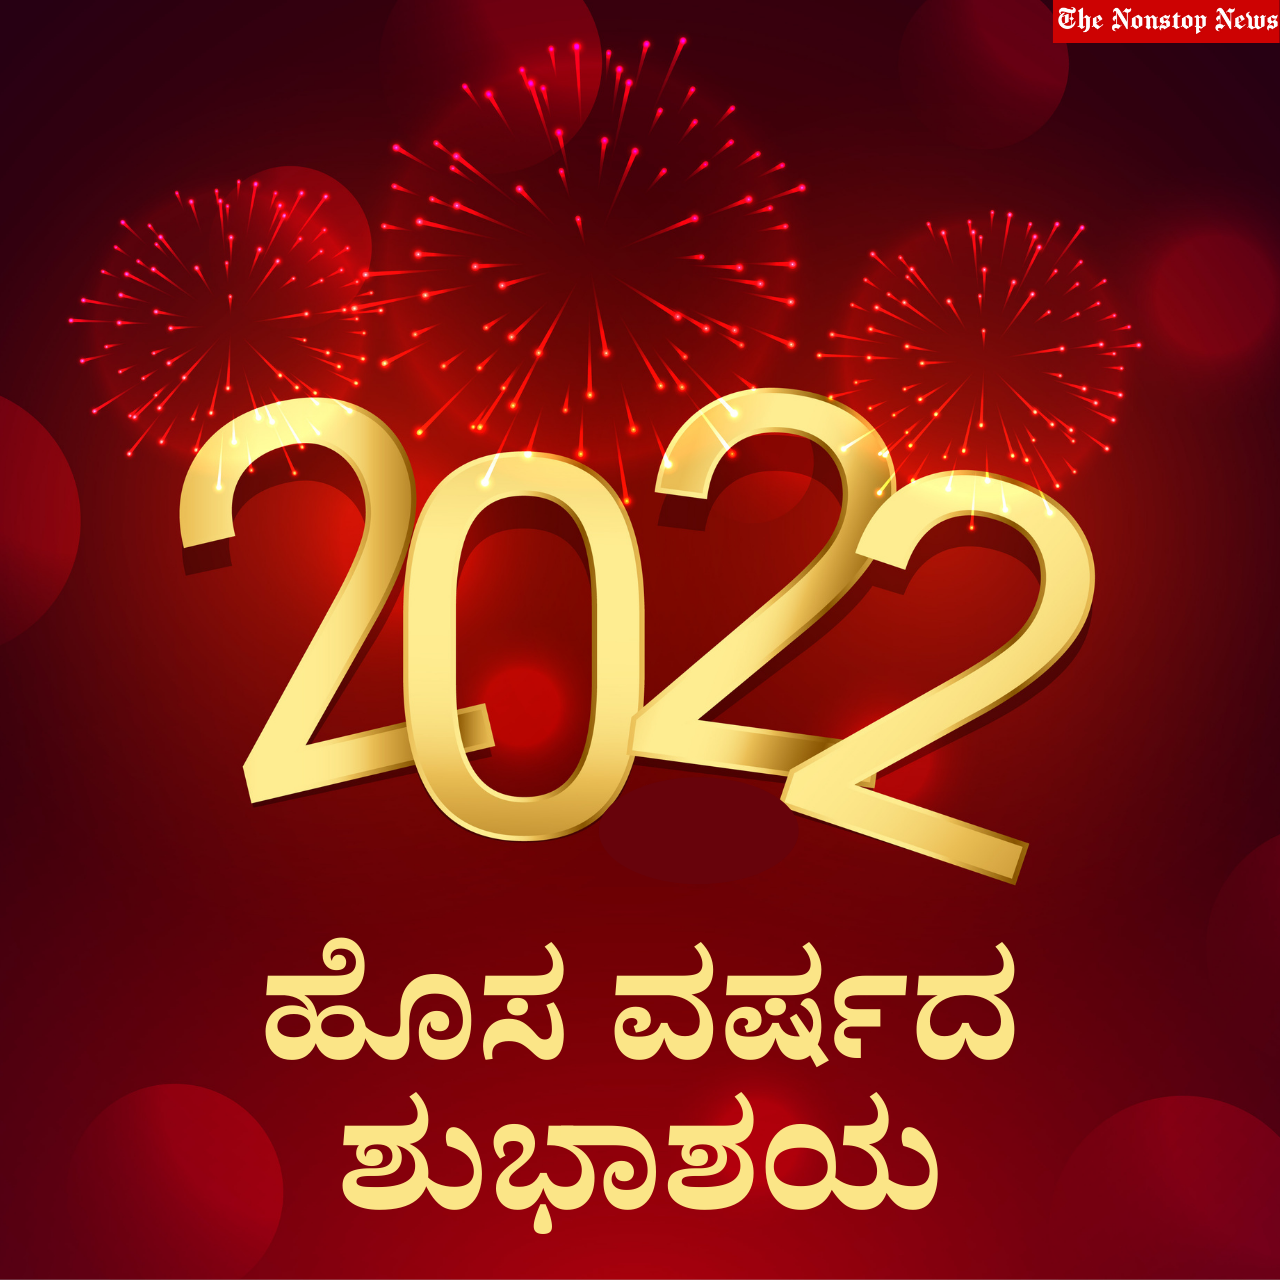 Happy New Year 2022: Kannada Greetings, Messages, Quotes, Wishes, Posters, HD Images to share